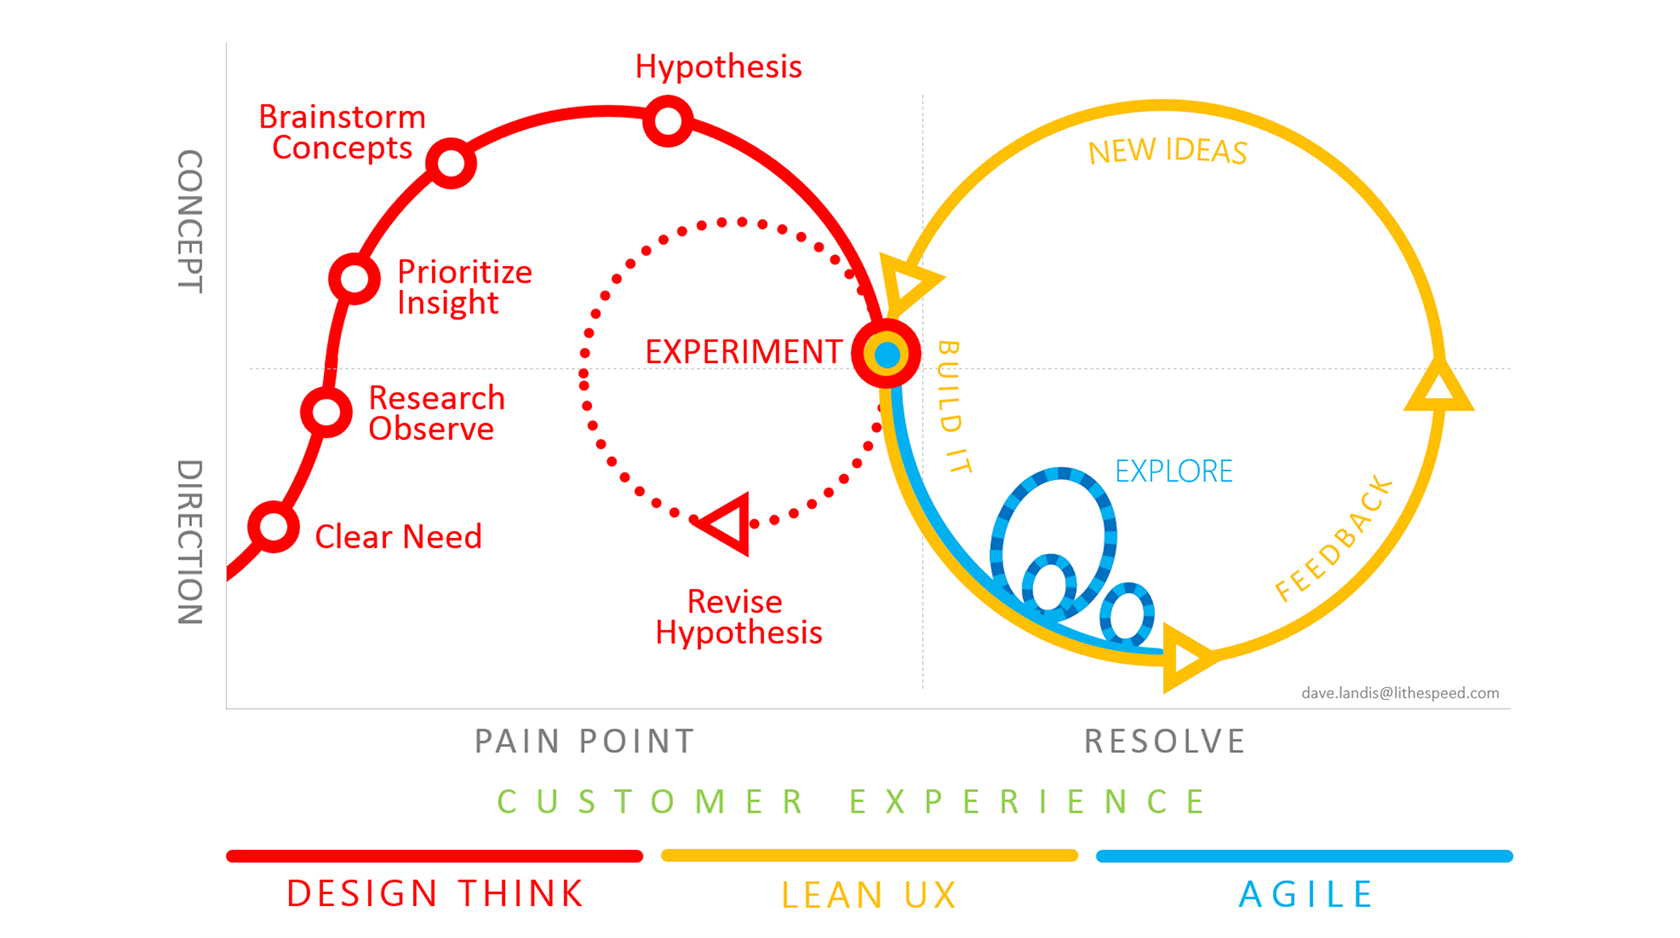 Interactive prototypes are part of a Lean UX and Agile design process